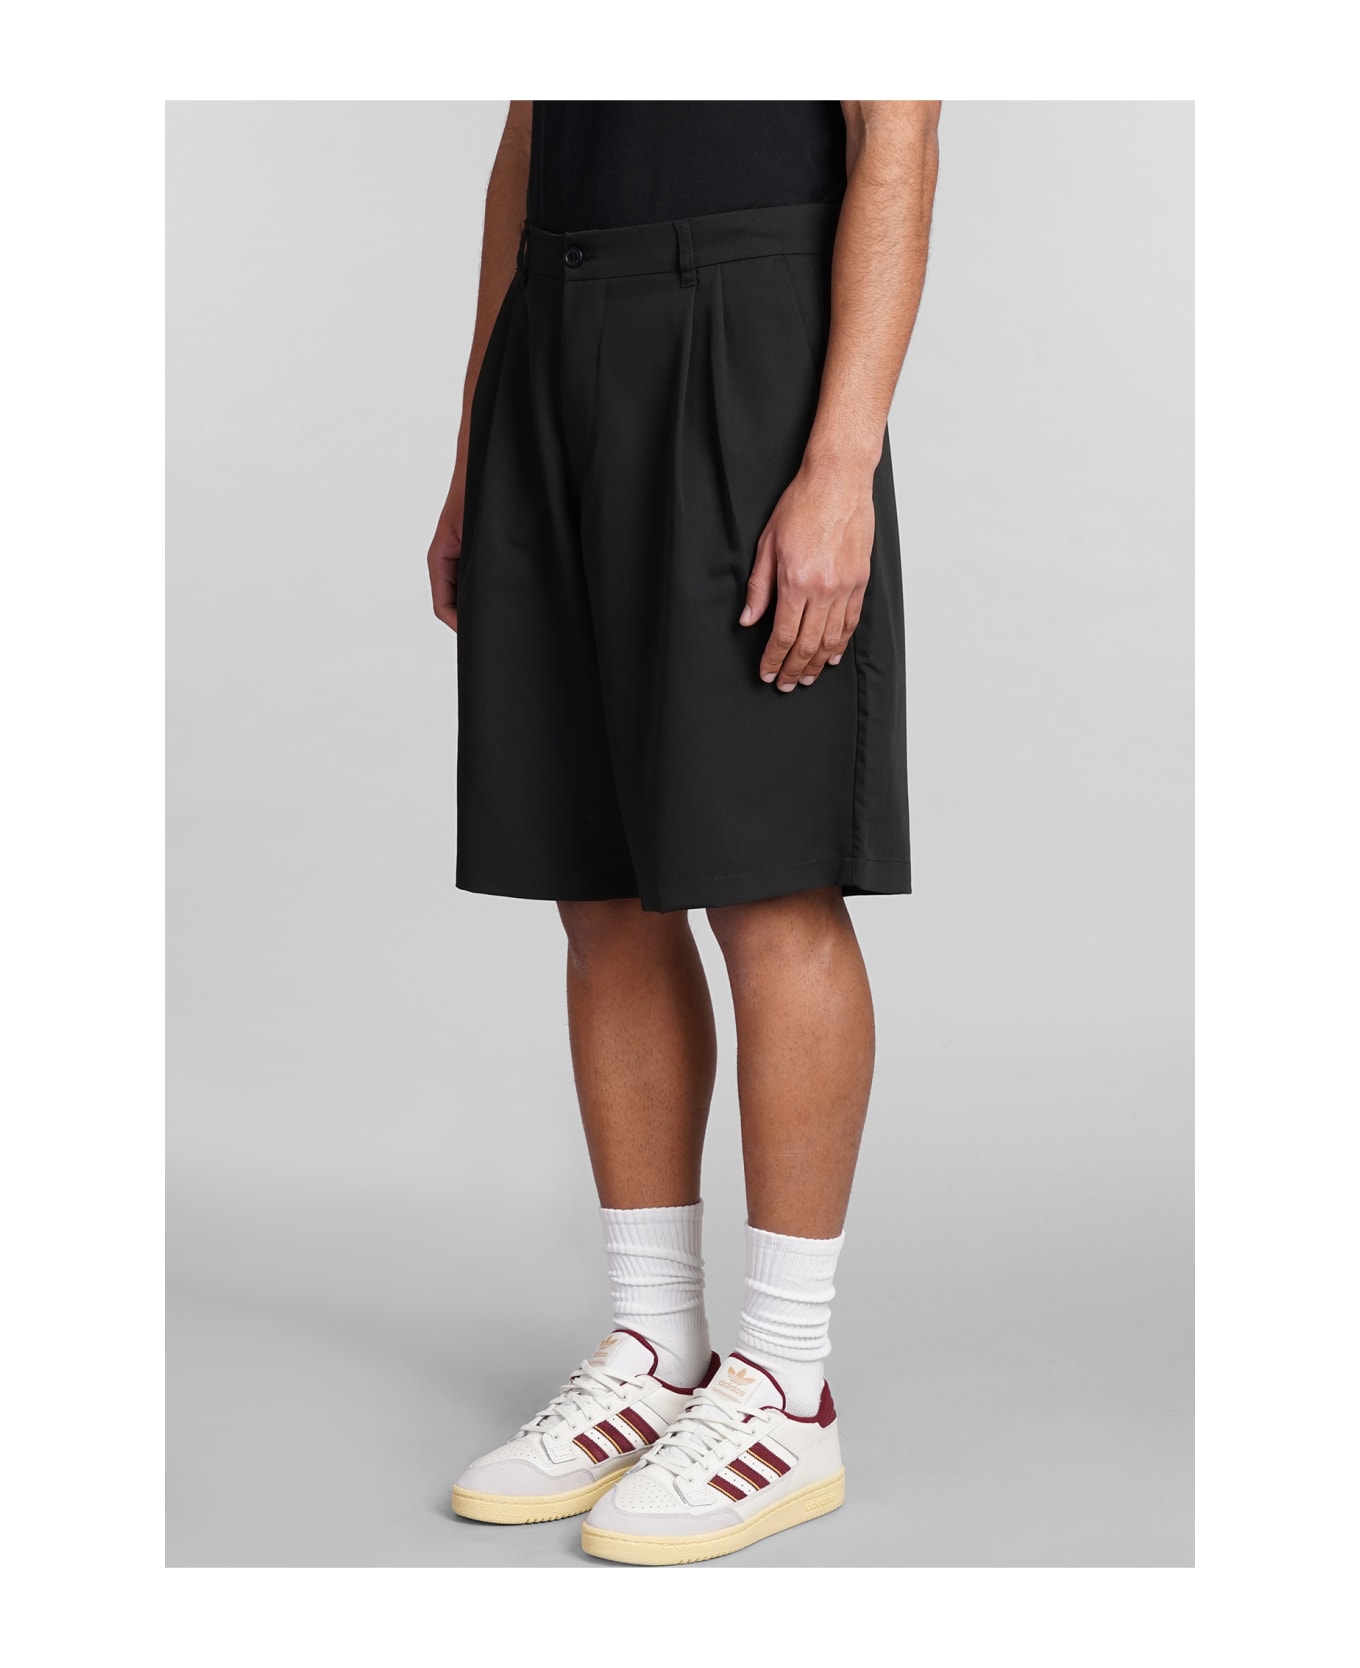 Family First Milano Shorts In Black Polyester - black